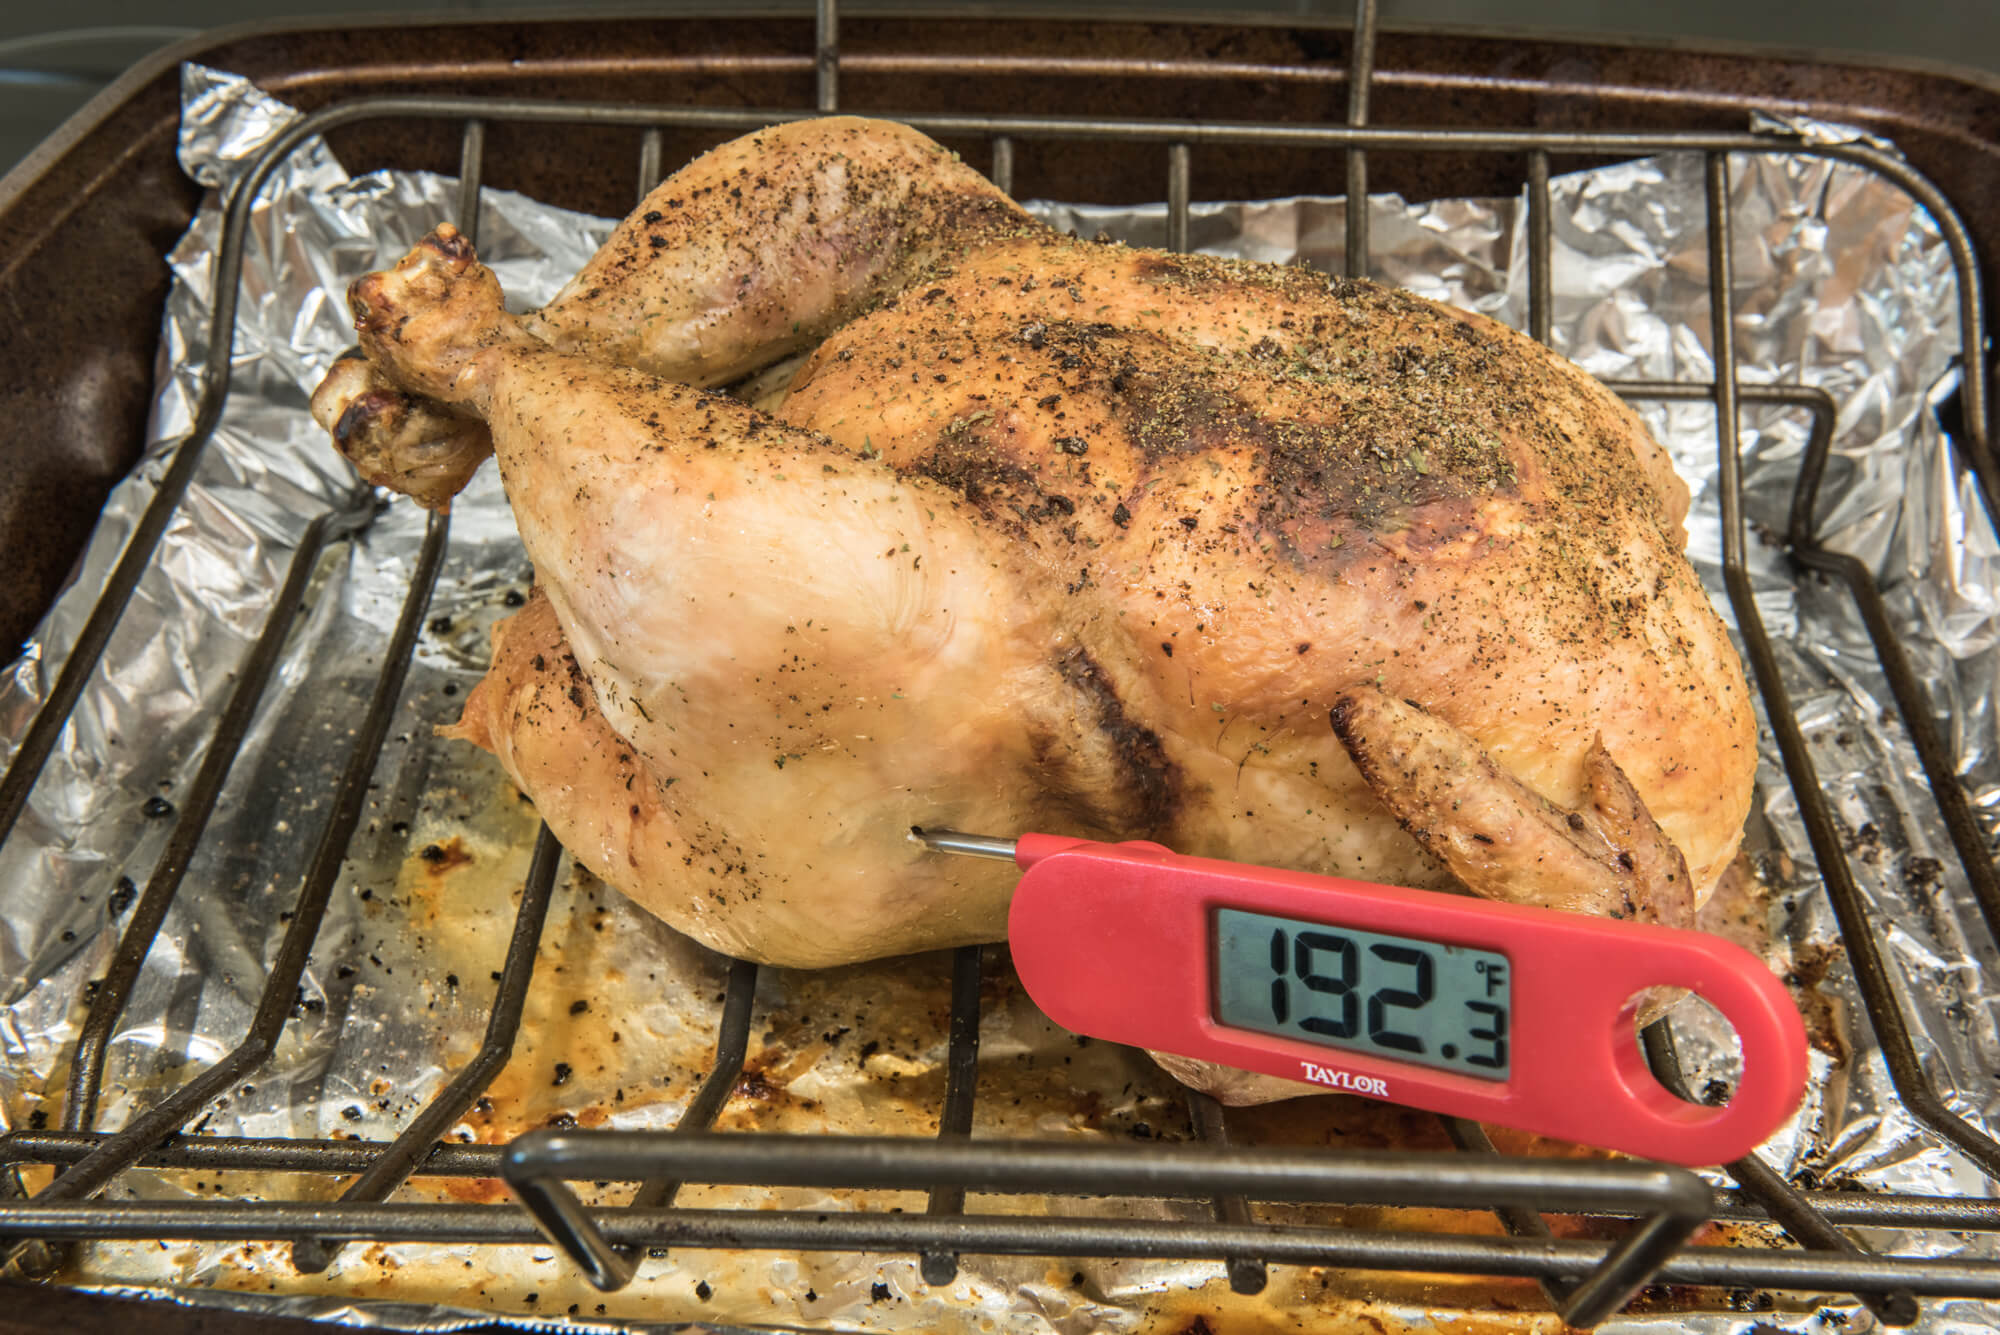 How to Properly Use a Meat Thermometer - How to Read Dial, Probe